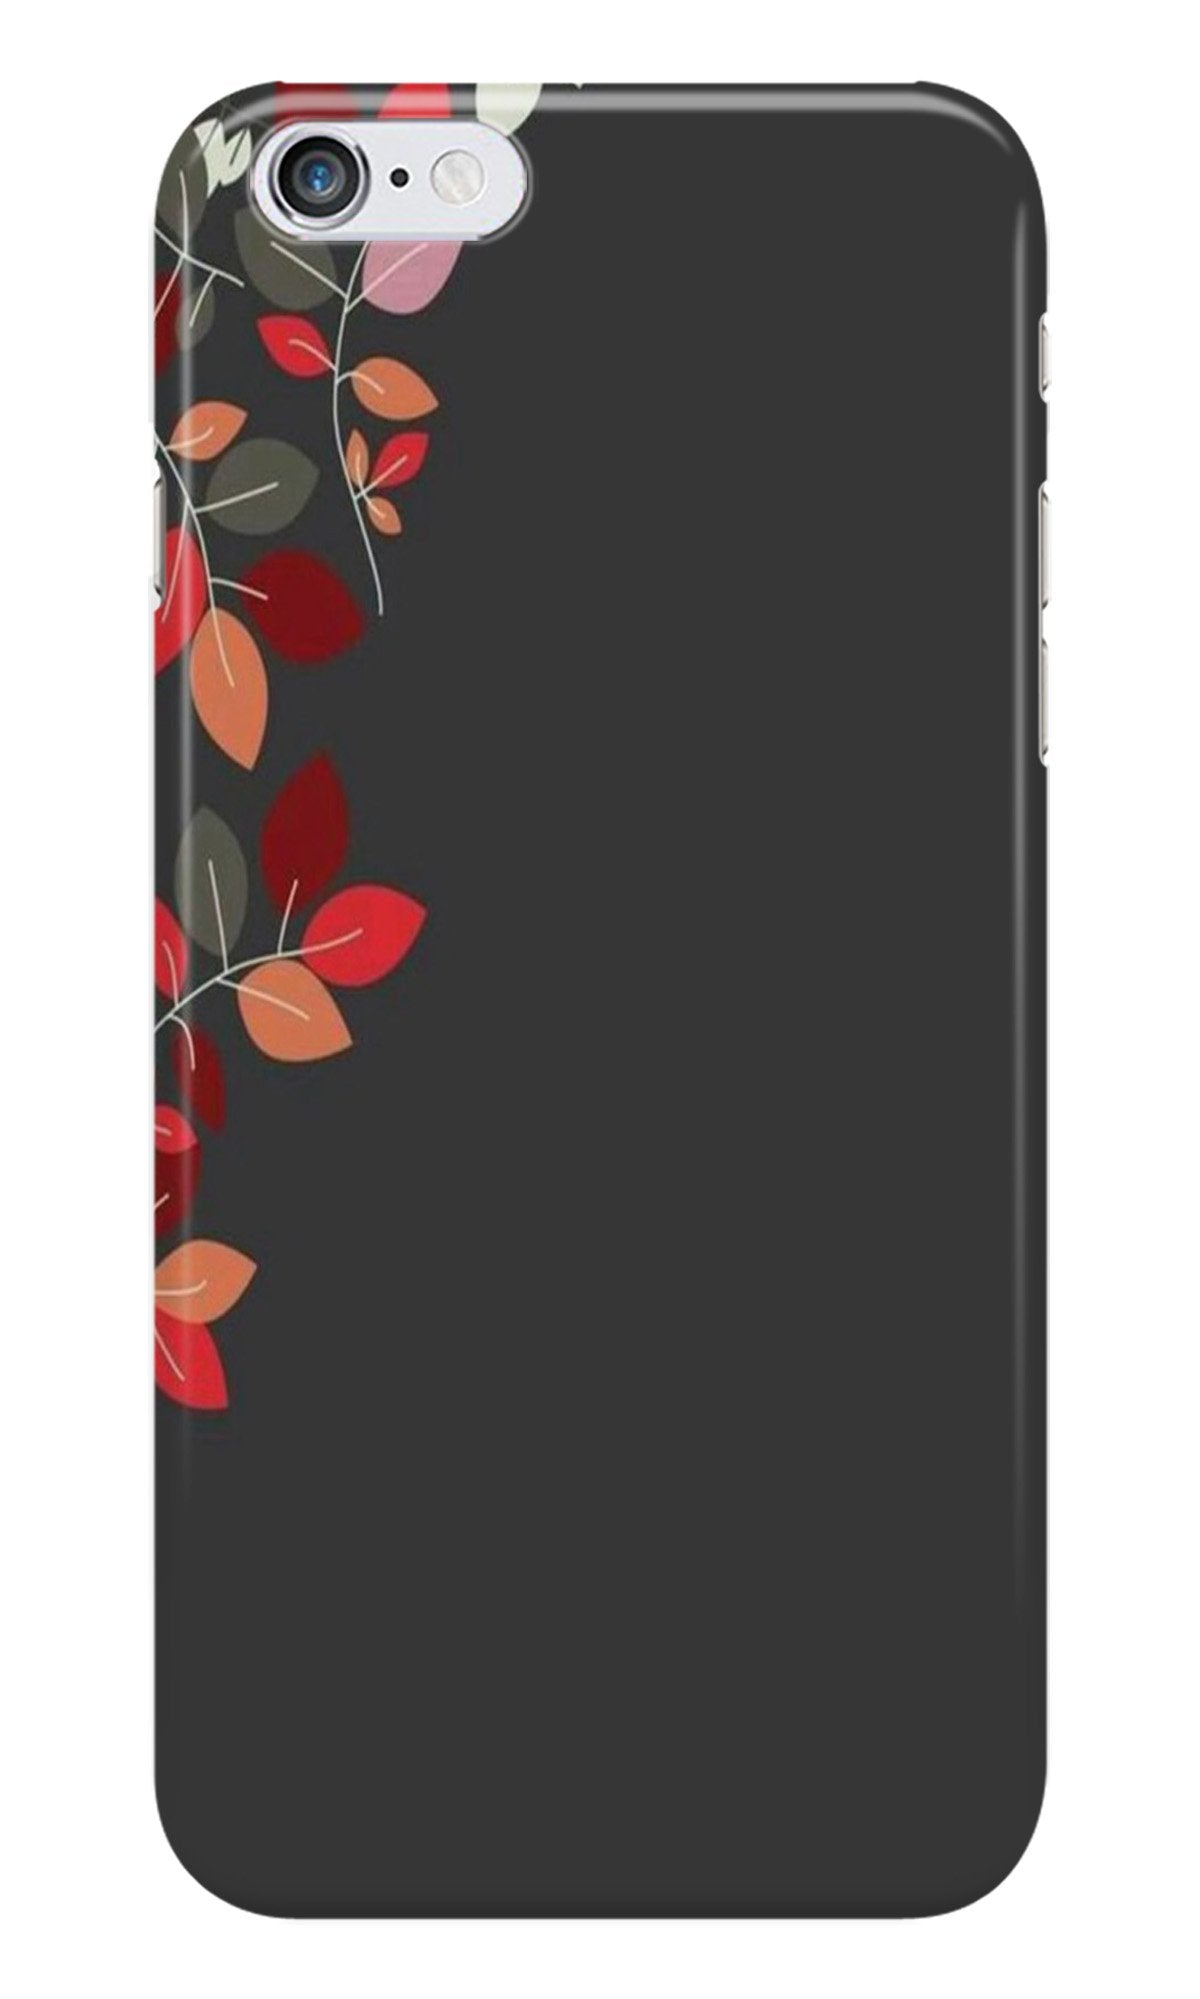 Grey Background Case for iPhone 6 Plus/ 6s Plus